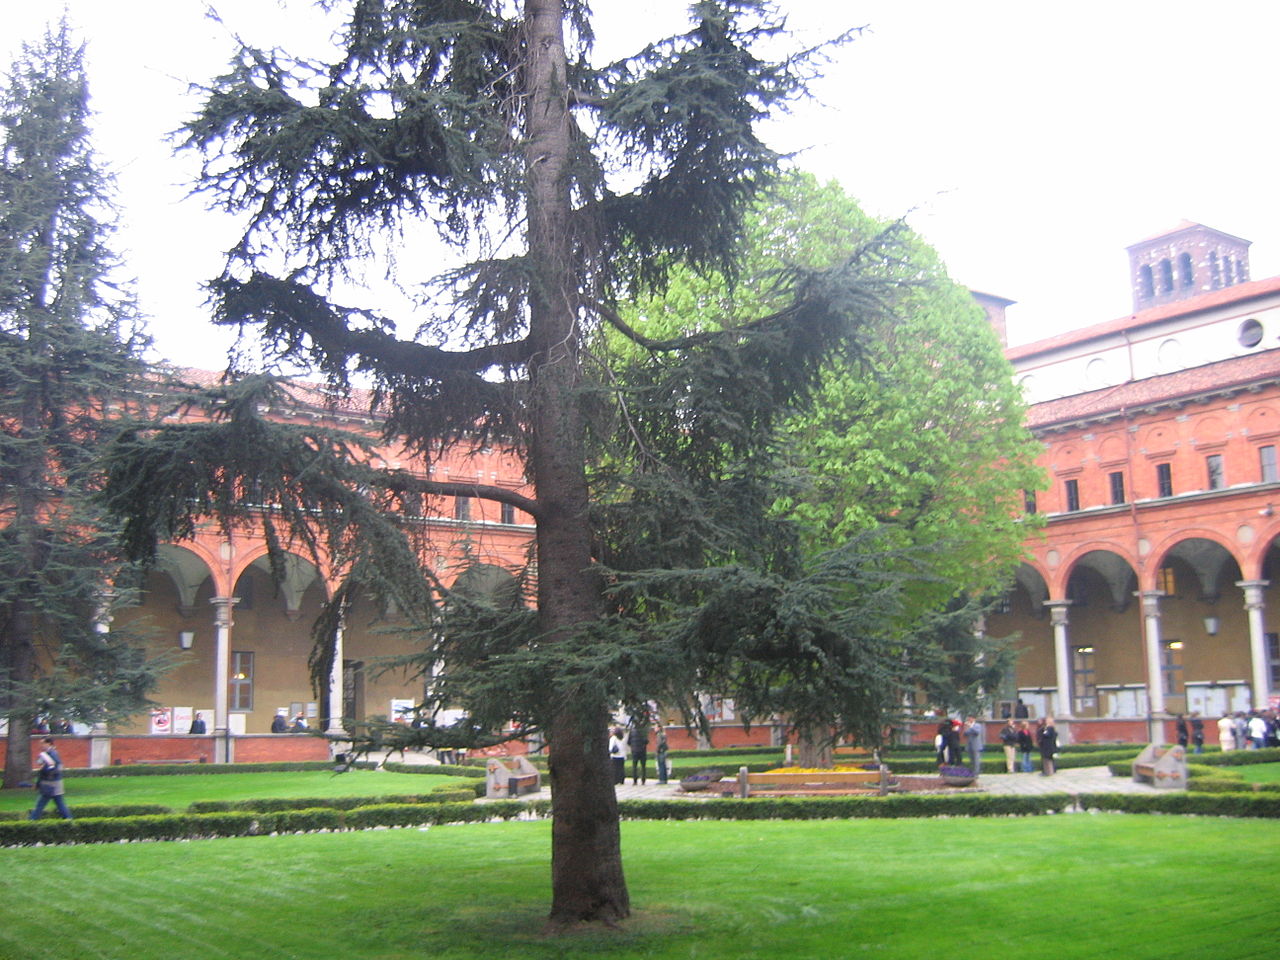 One of the inner yards (a former cloister) of Università Cattolica in Milan.